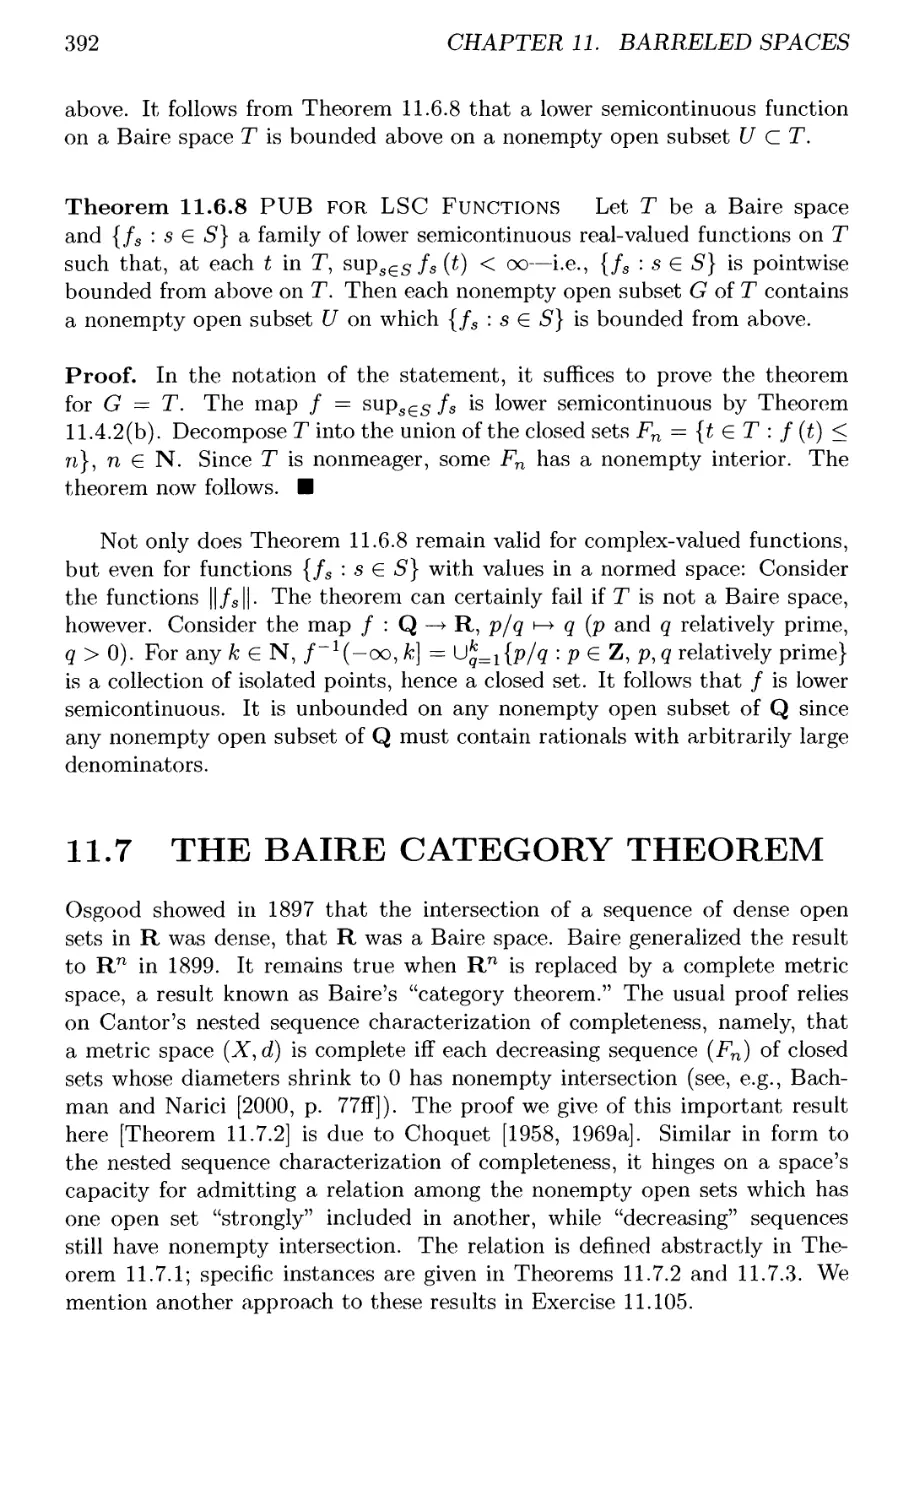 11.7 THE BAIRE CATEGORY THEOREM